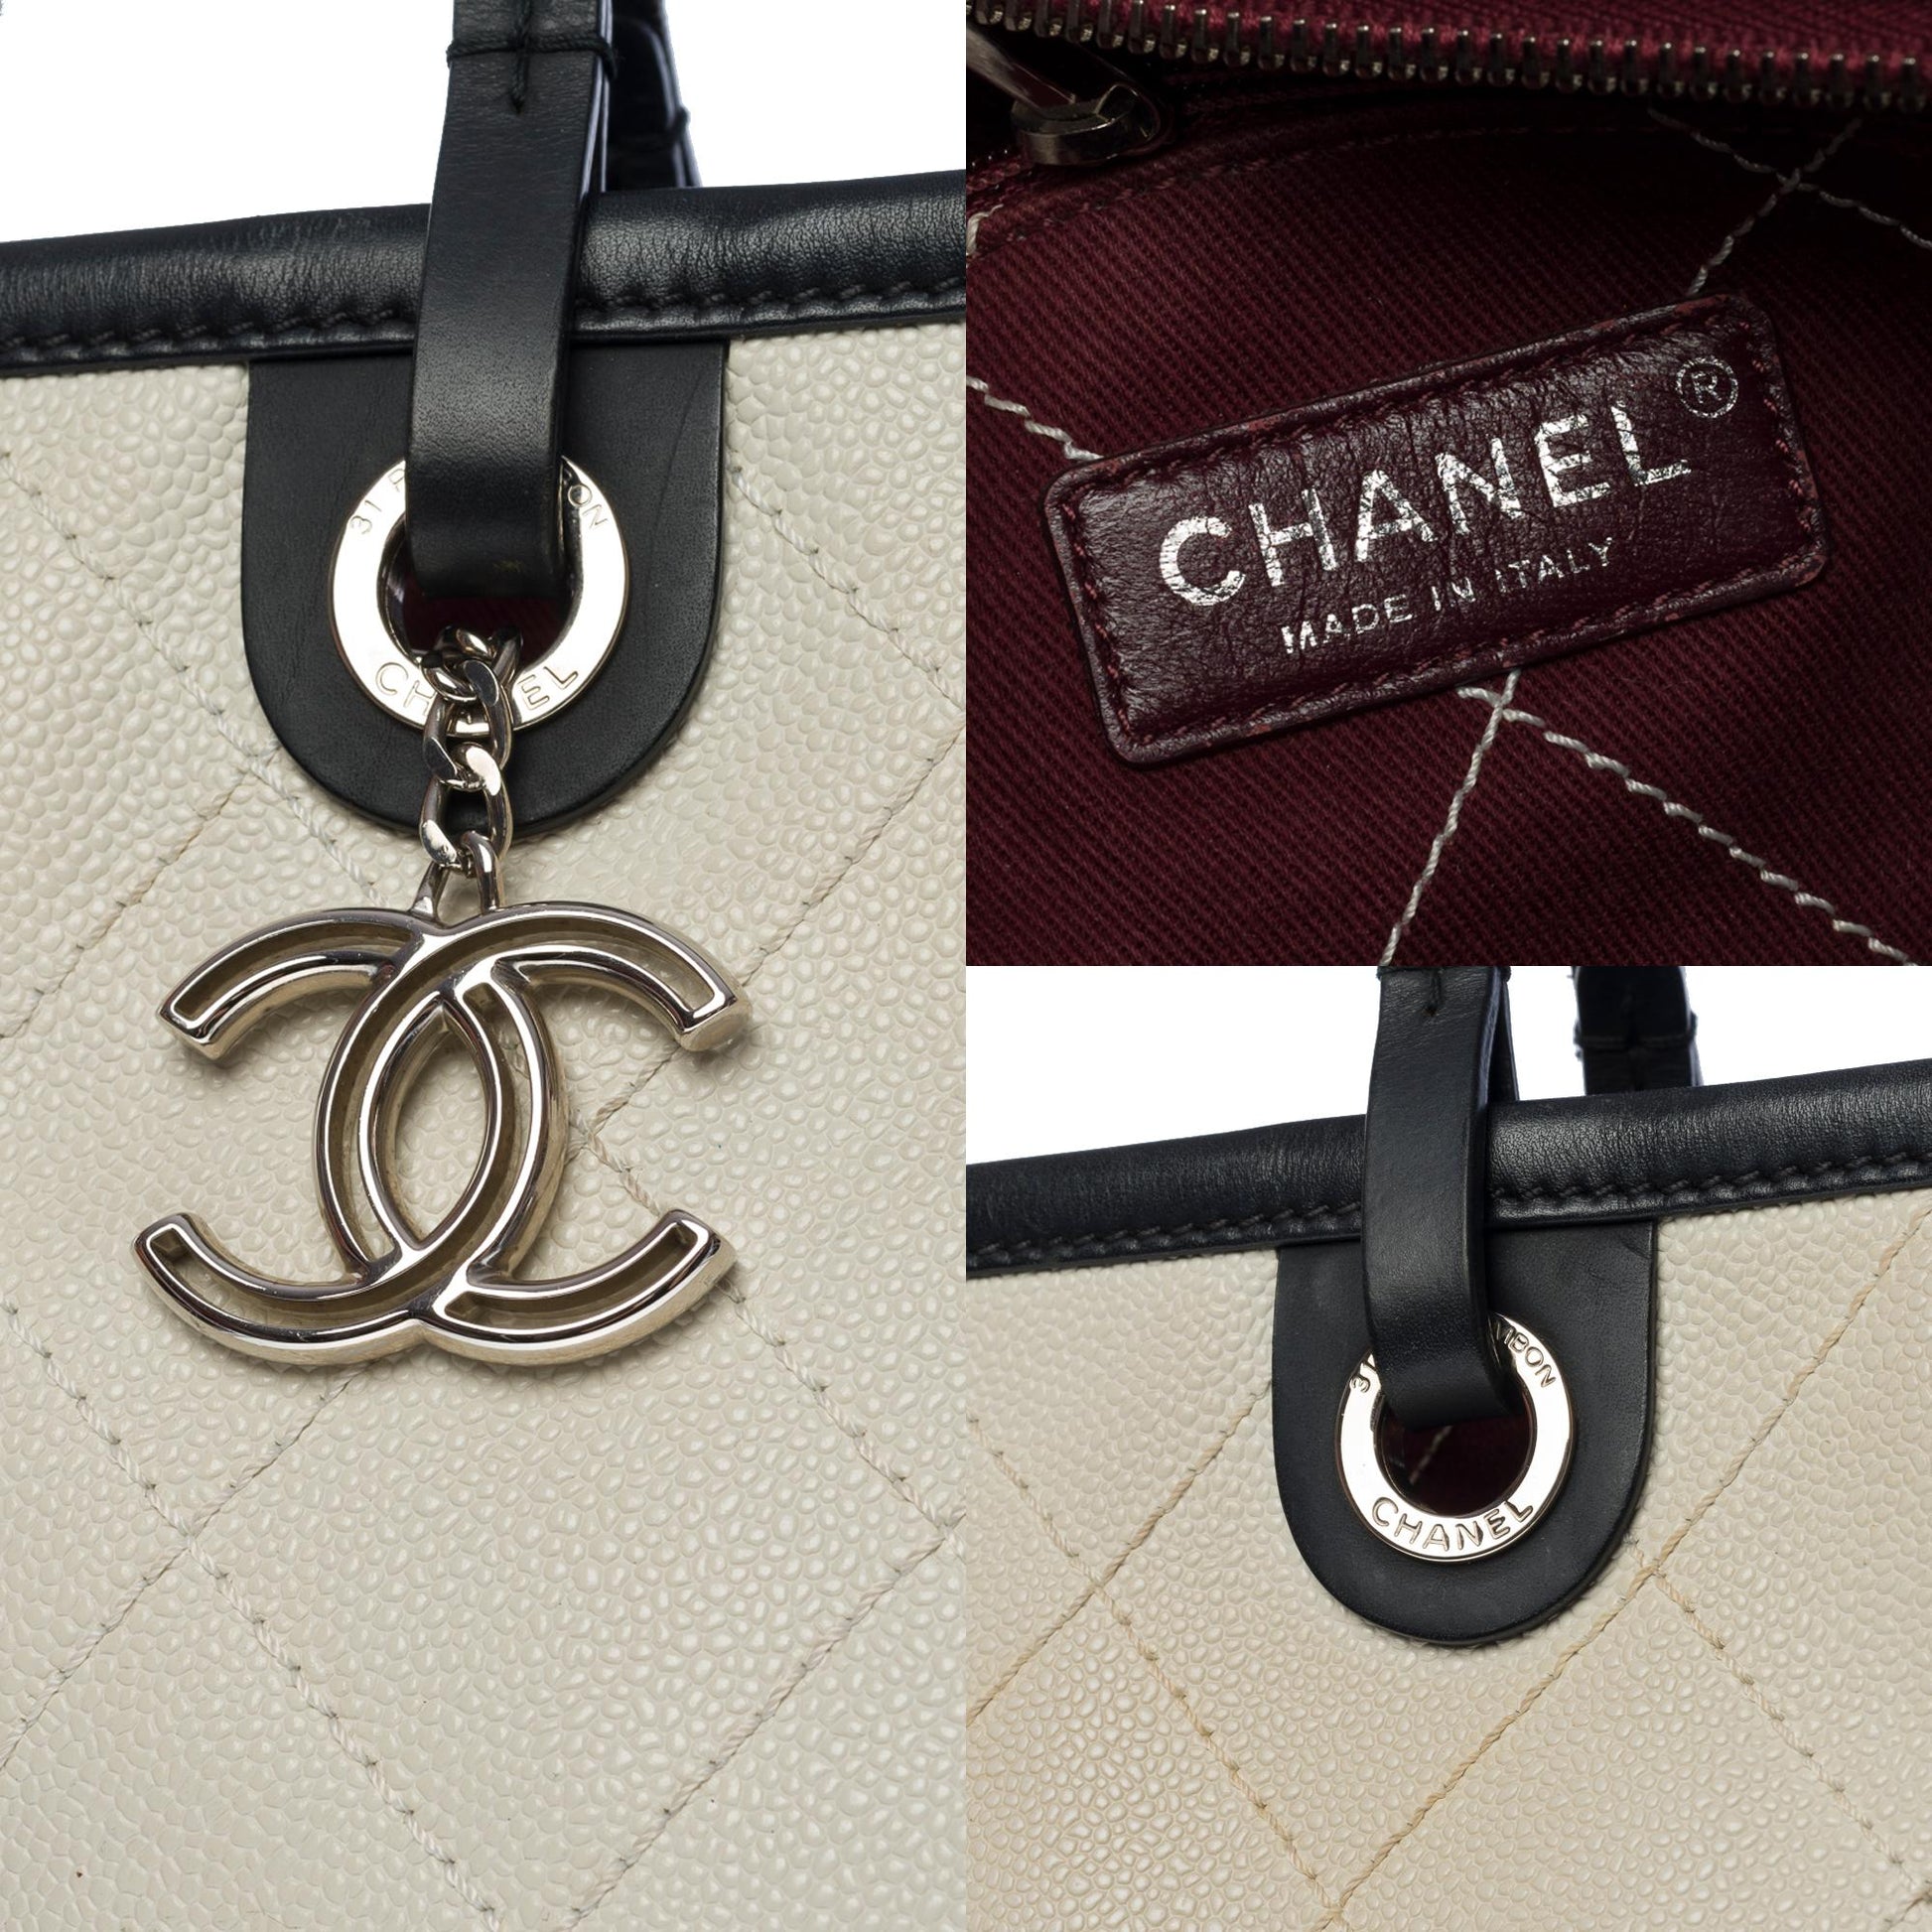 CHANEL Amazing Shopping Tote bag in White Caviar quilted leather, SHW